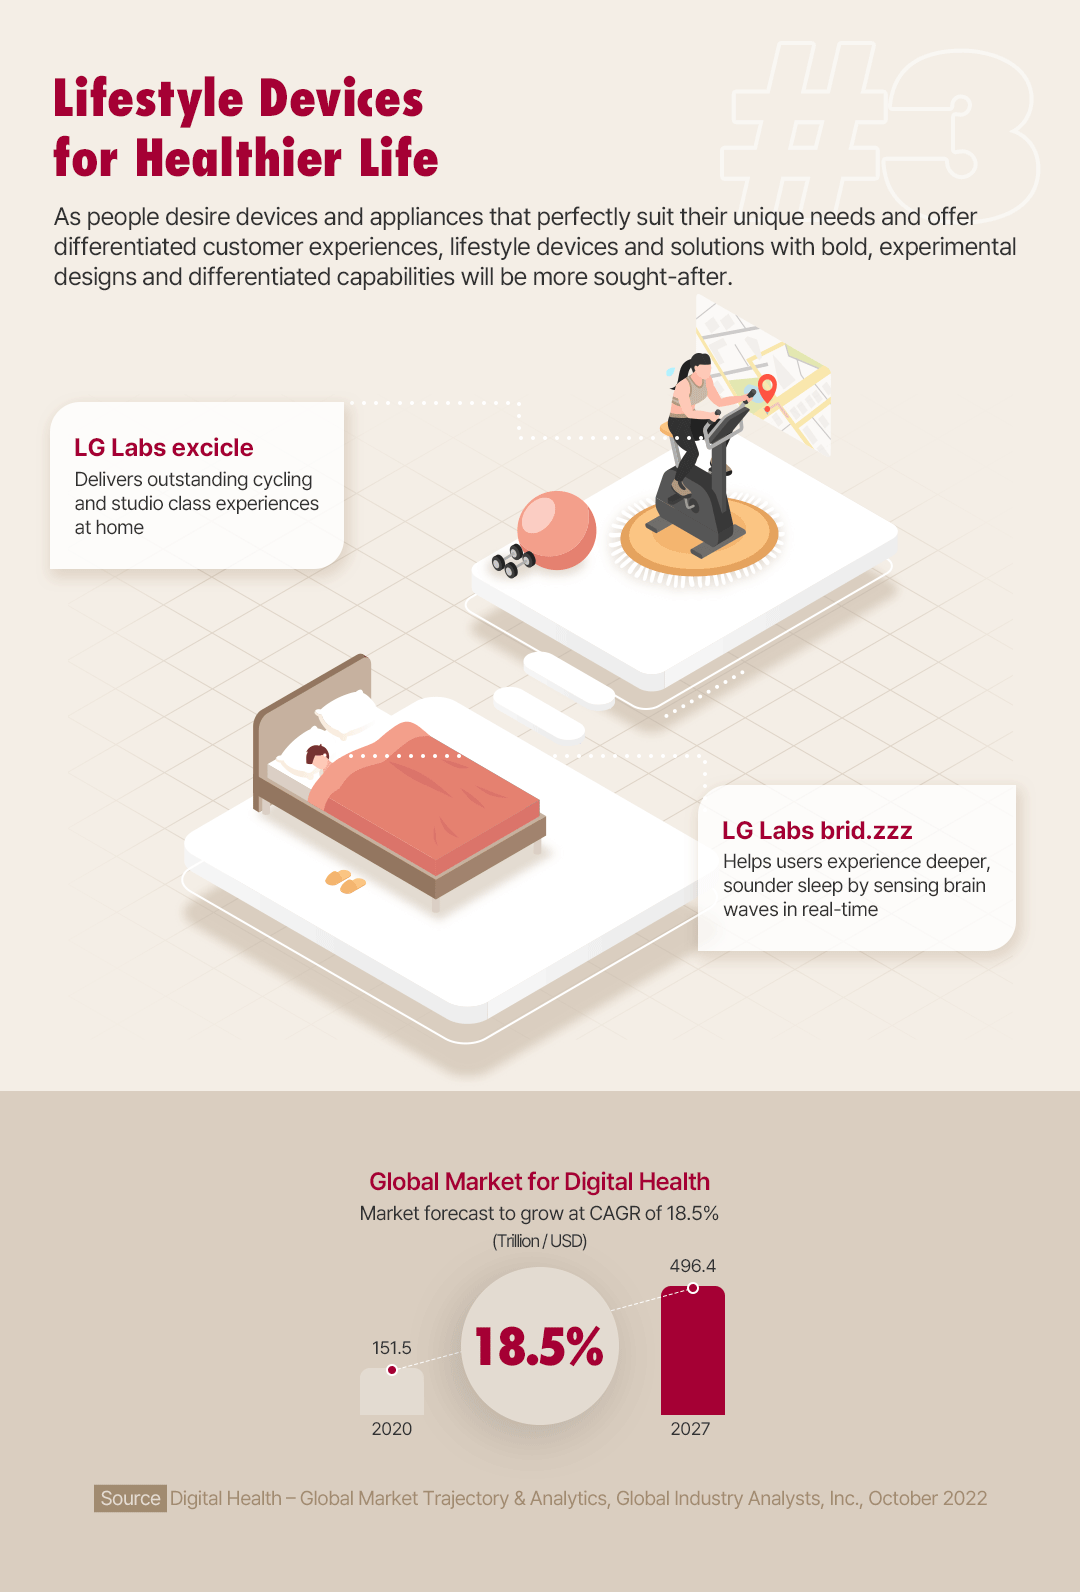 The image with a title "Lifestyle Devices for Healthier Life" with an illustration of a person doing exercise with LG Labs excicle and another person sleeping wearing LG Labs brid.zzz